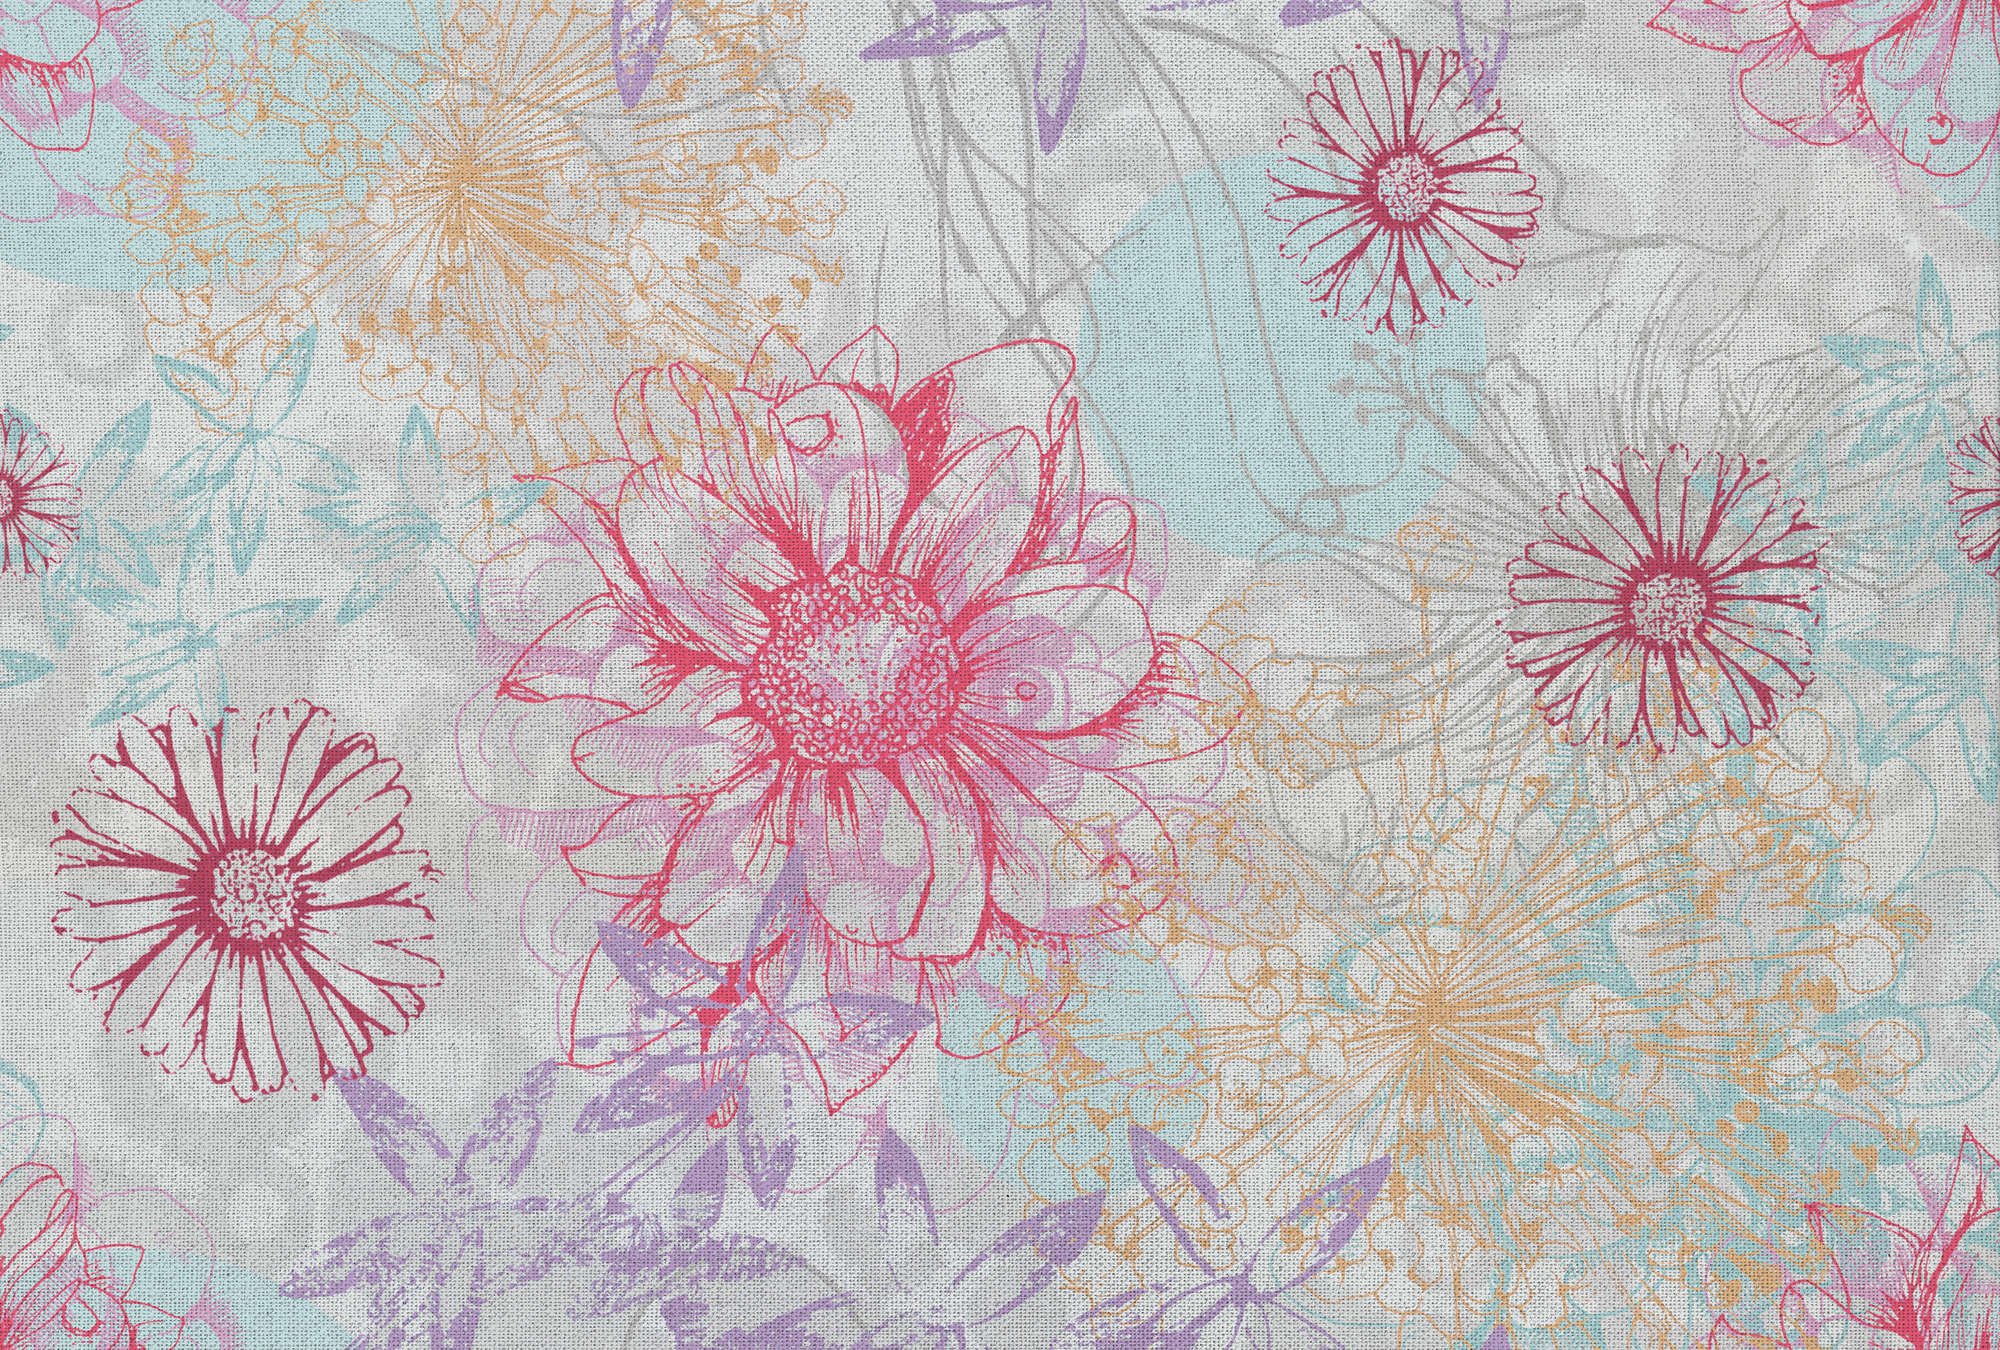             Colorful photo wallpaper with textile look & flowers - pink, blue, white
        